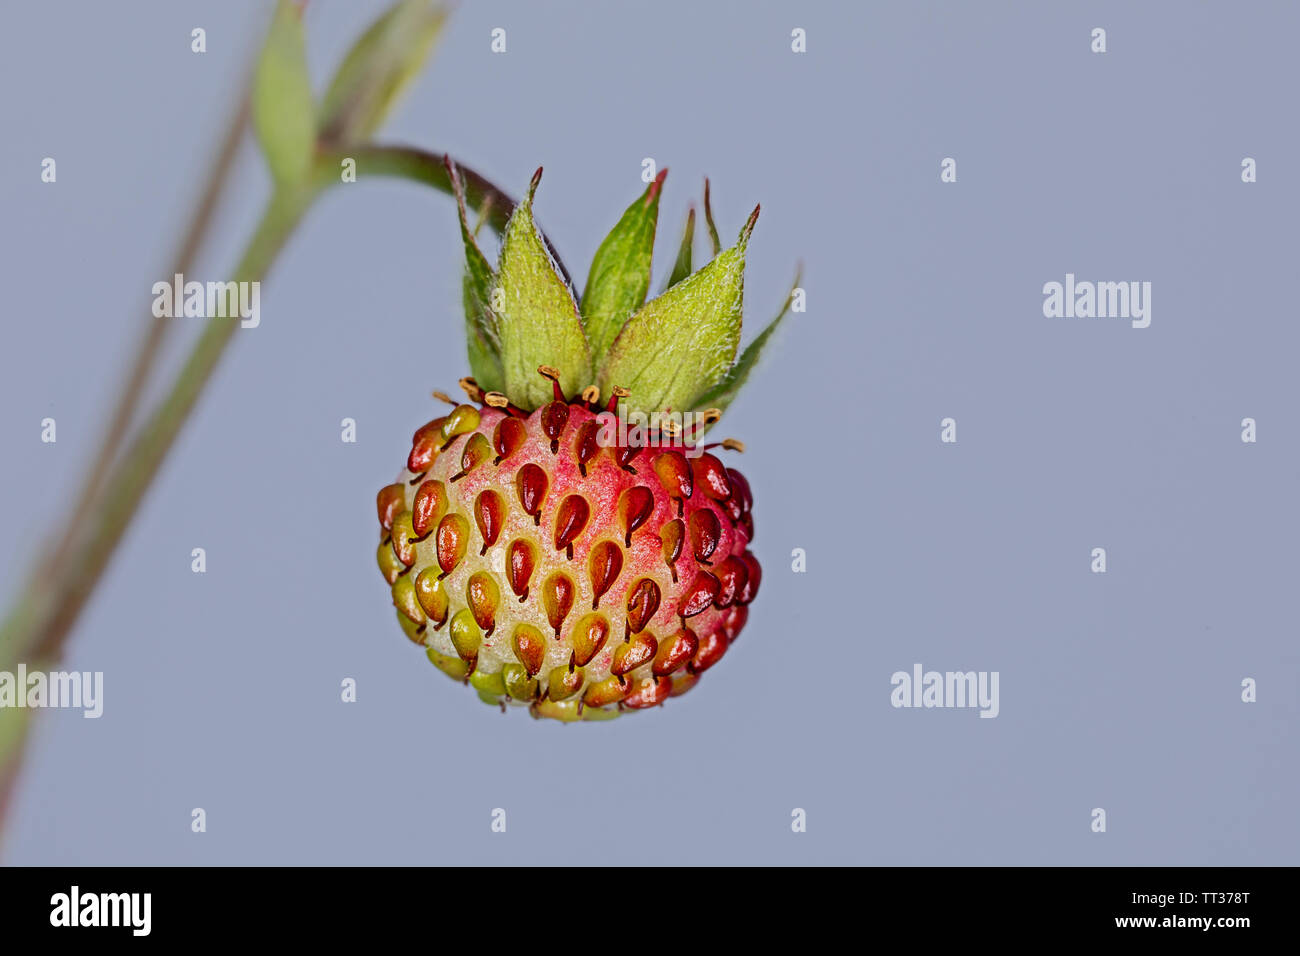 unripe berry of a woodland strawberry Stock Photo